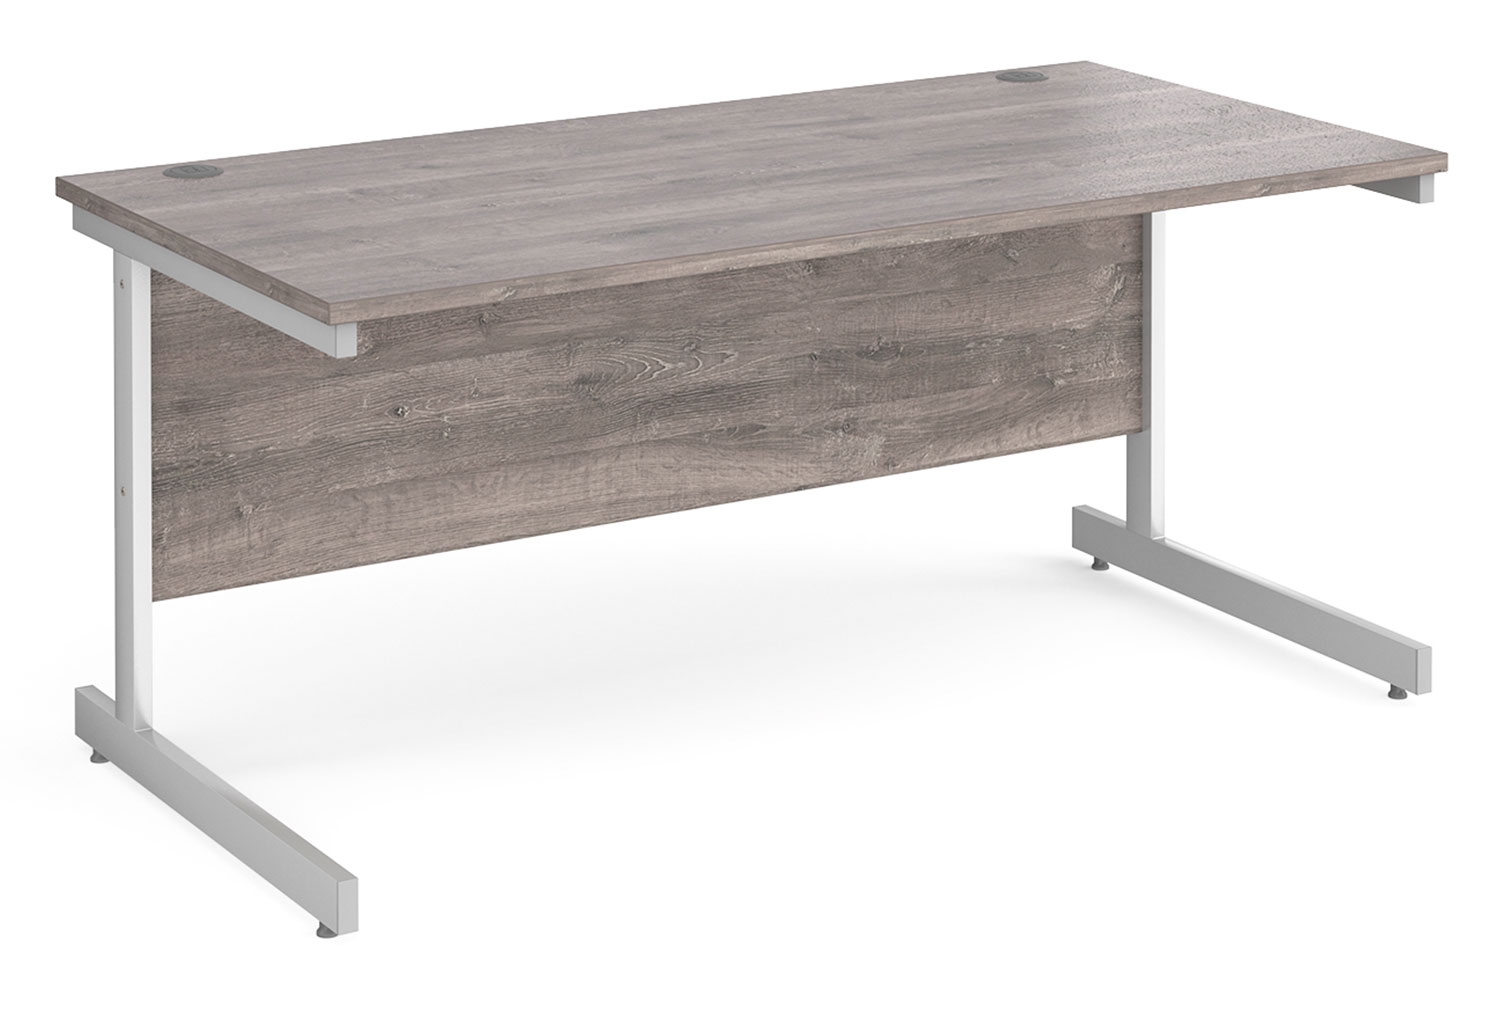 Thrifty Next-Day Rectangular Office Desk Grey Oak, 160wx80dx73h (cm), Express Delivery